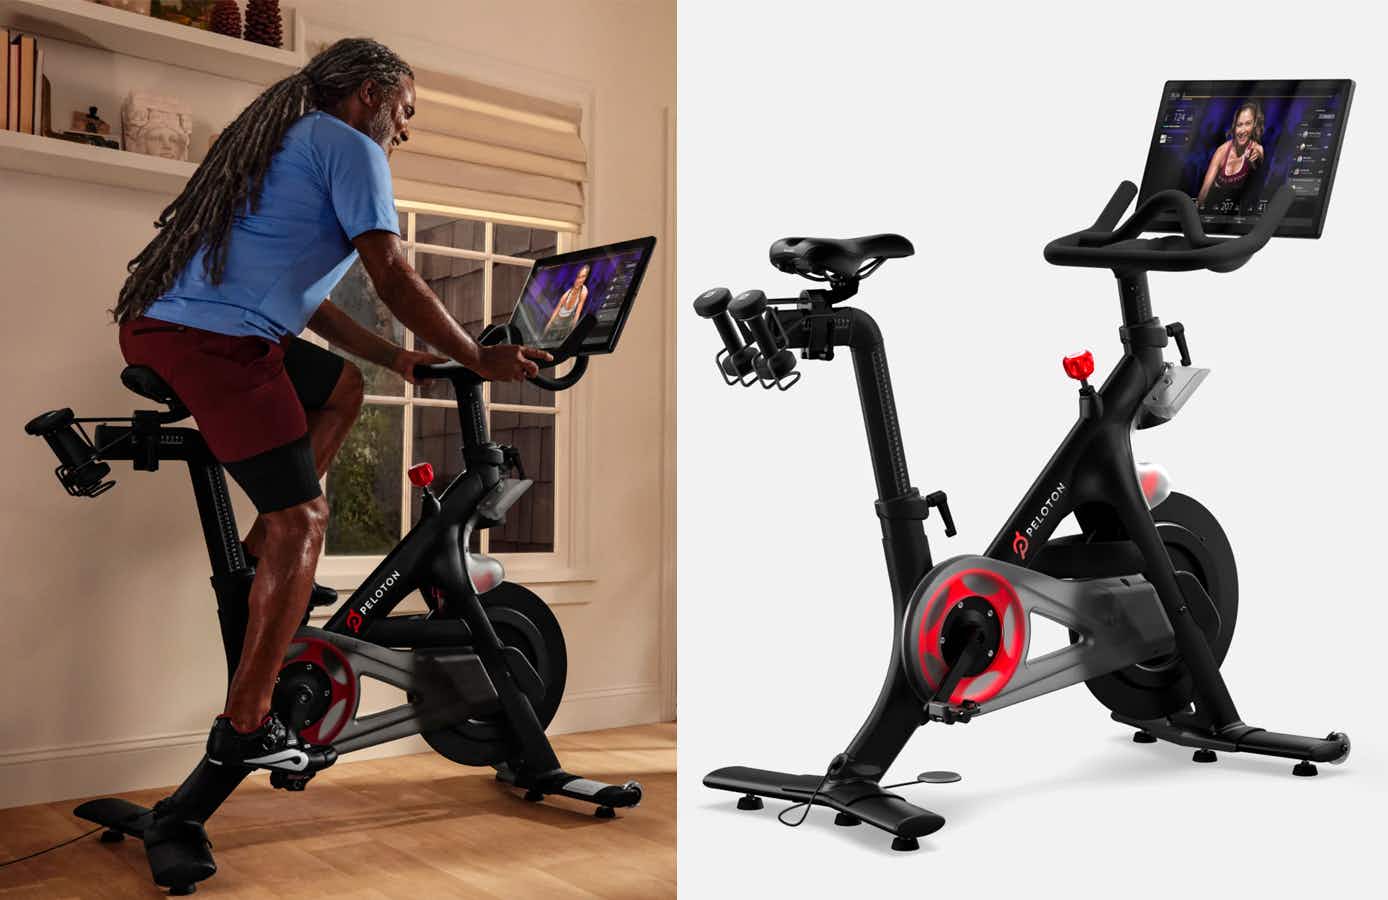 Someone riding an Original Peloton stationary exercise bike in their home next to the same model bike on a white background.